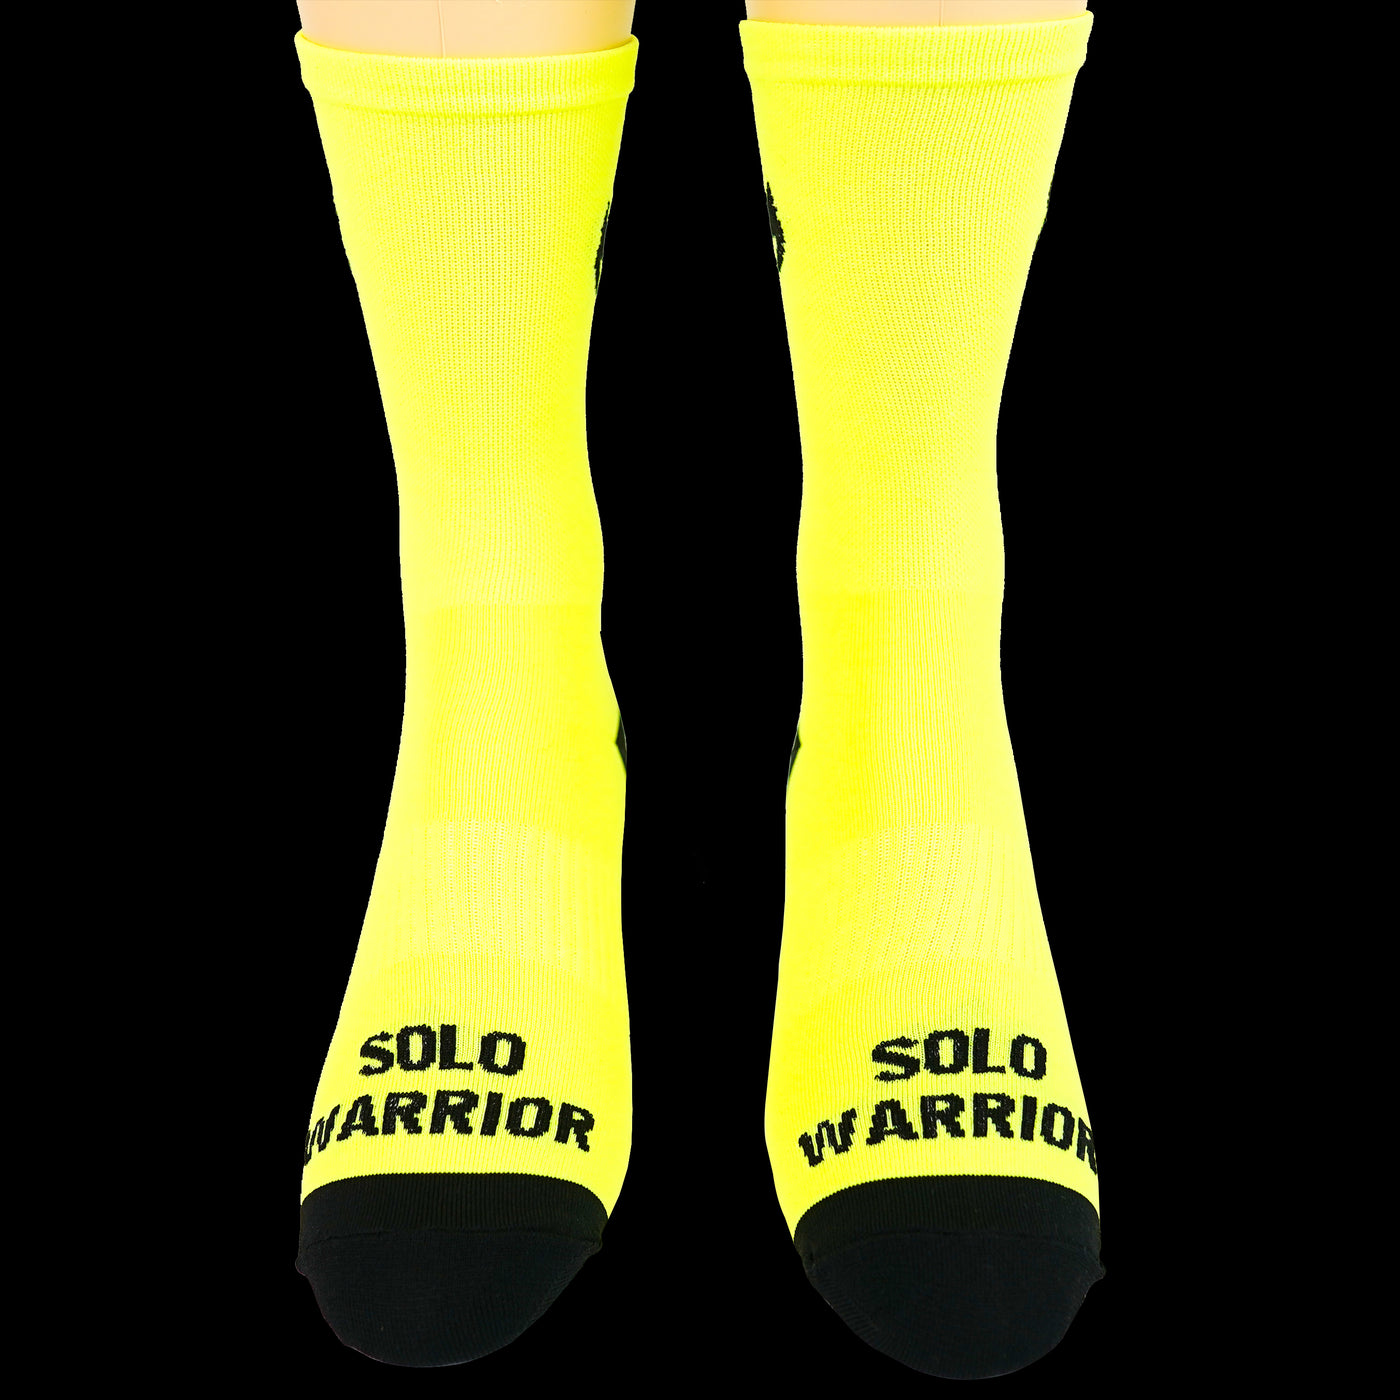 The New 2.0 6” Men’s and Women’s, Solid Fluorescent Green, Compression, Cycling socks.